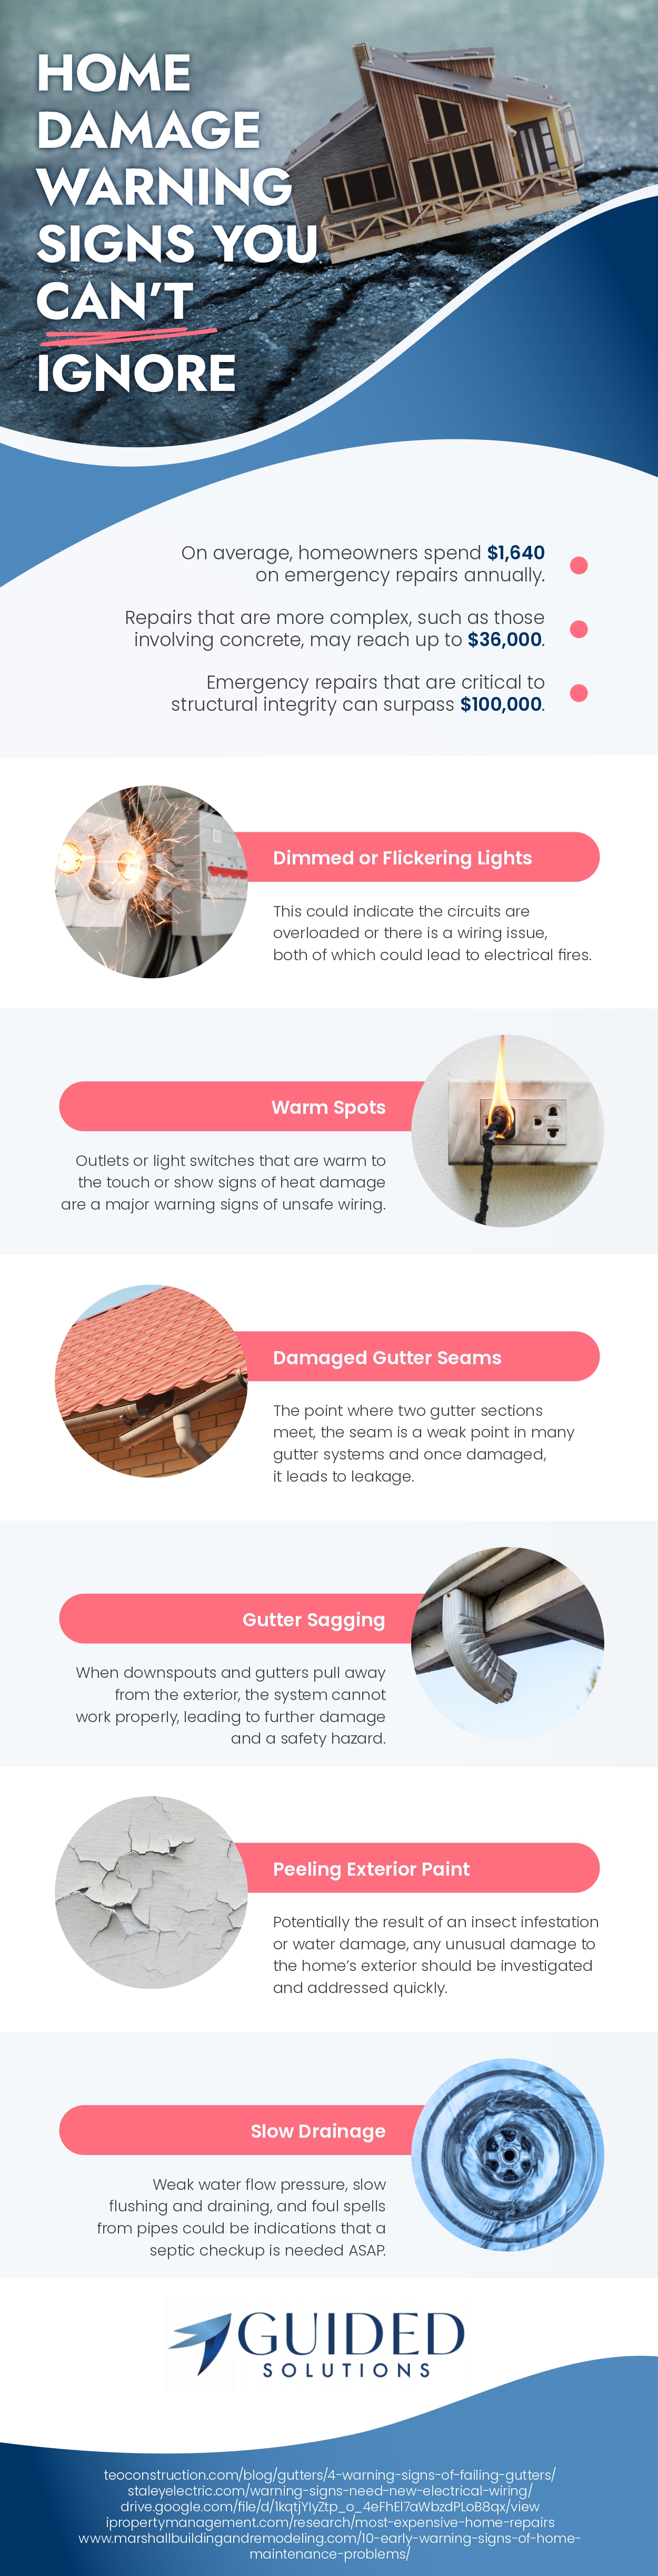 Signs of Home Damage Warranting Immediate Attention: A Comprehensive Guide